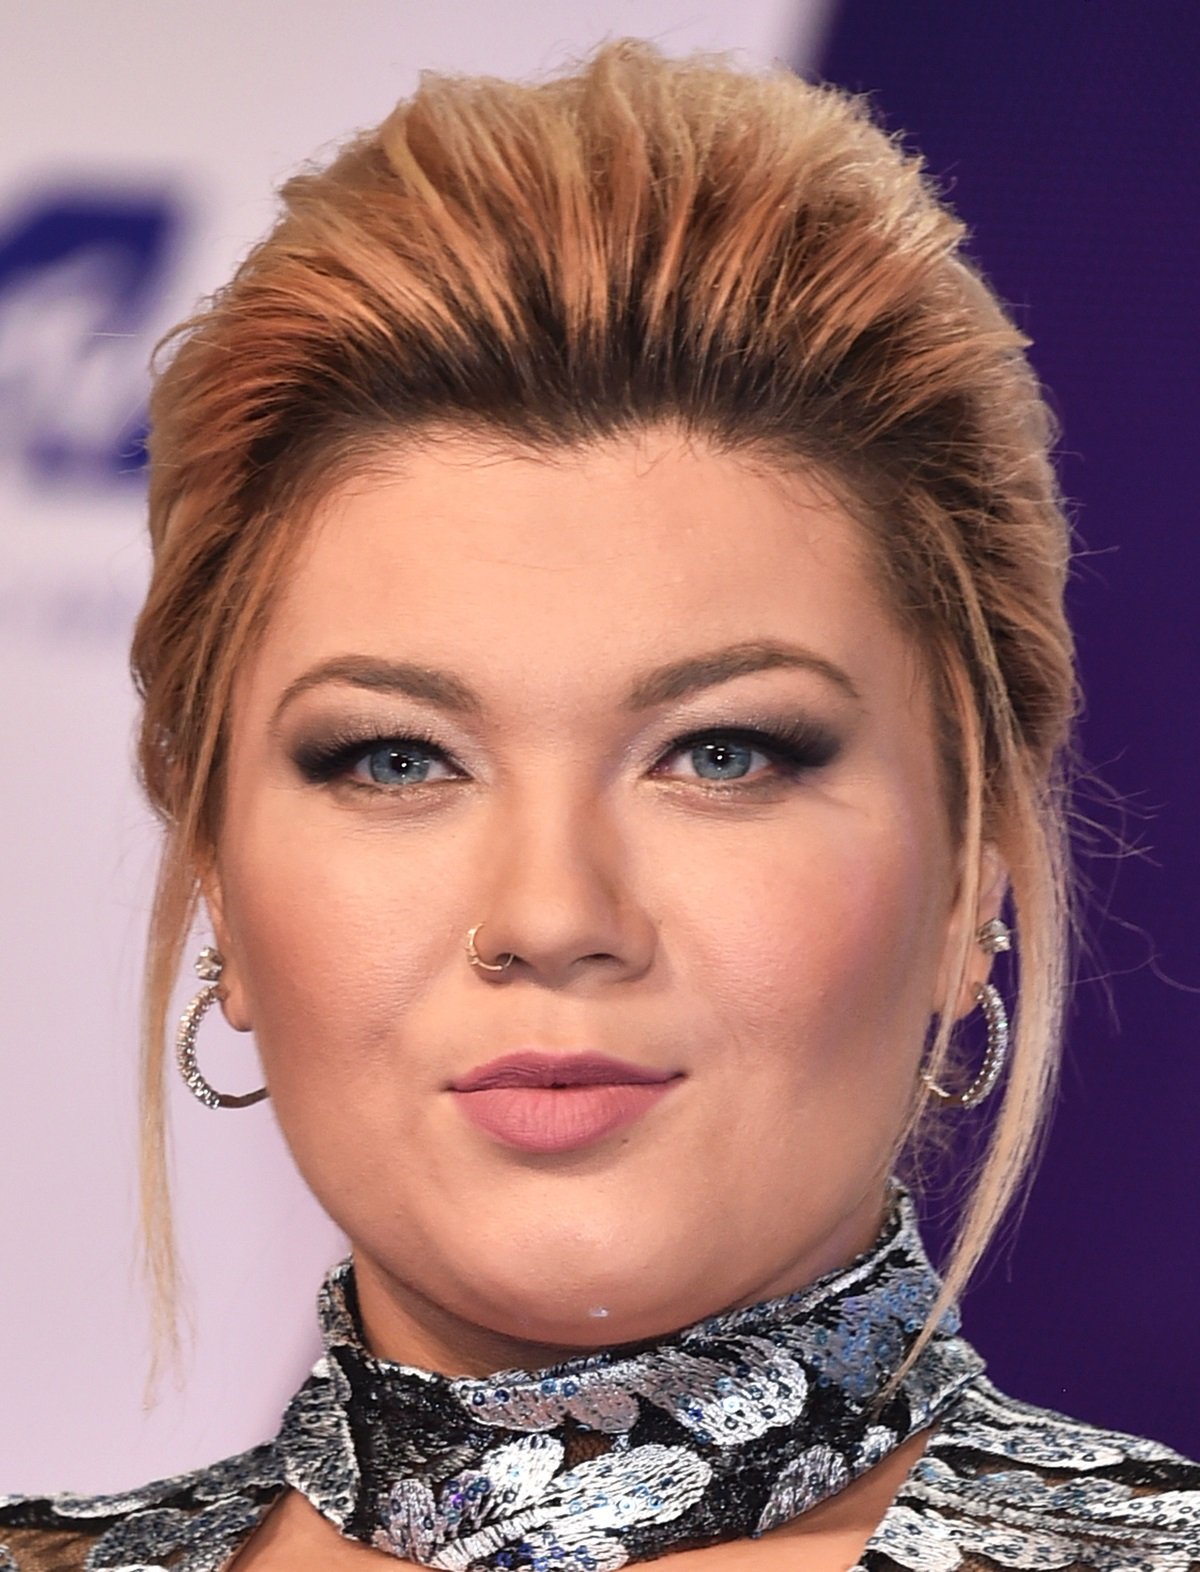 Amber Portwood attends the 2017 MTV Video Music Awards at The Forum on August 27, 2017